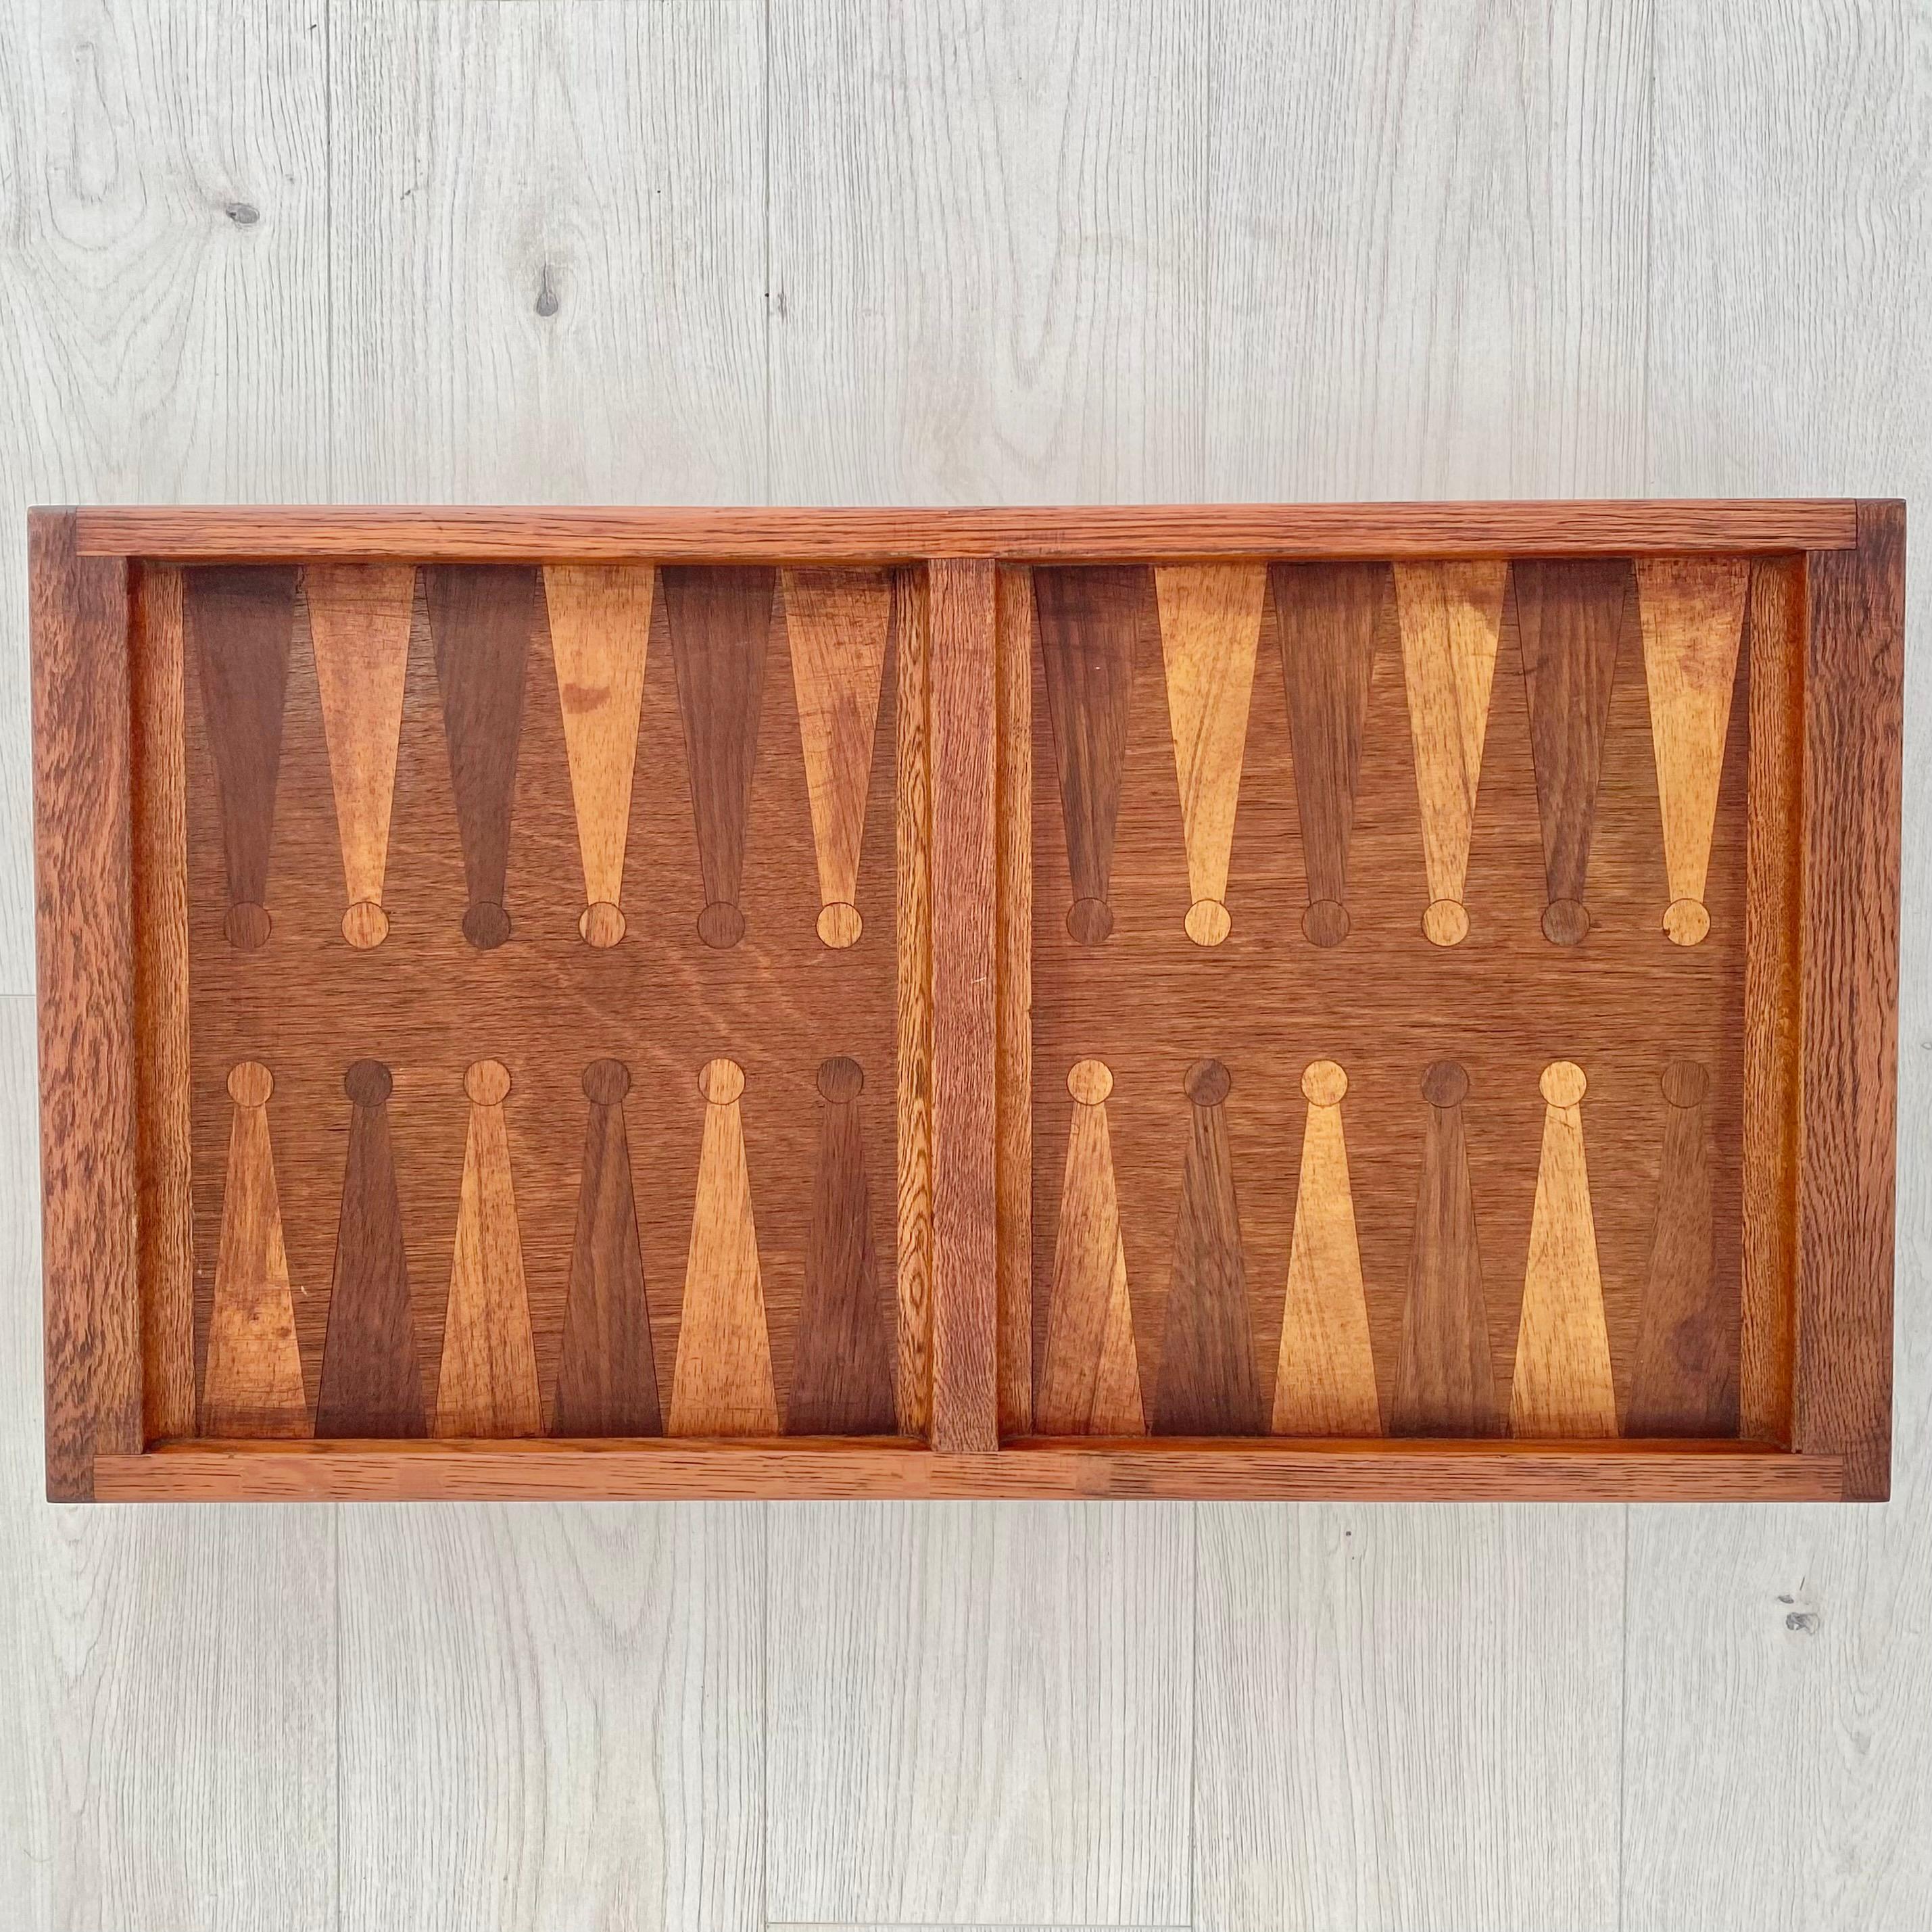 Unique backgammon board made in Denmark, circa 1960s. Inlaid table with intricate design details. Footed bottom so the board floats 3.5